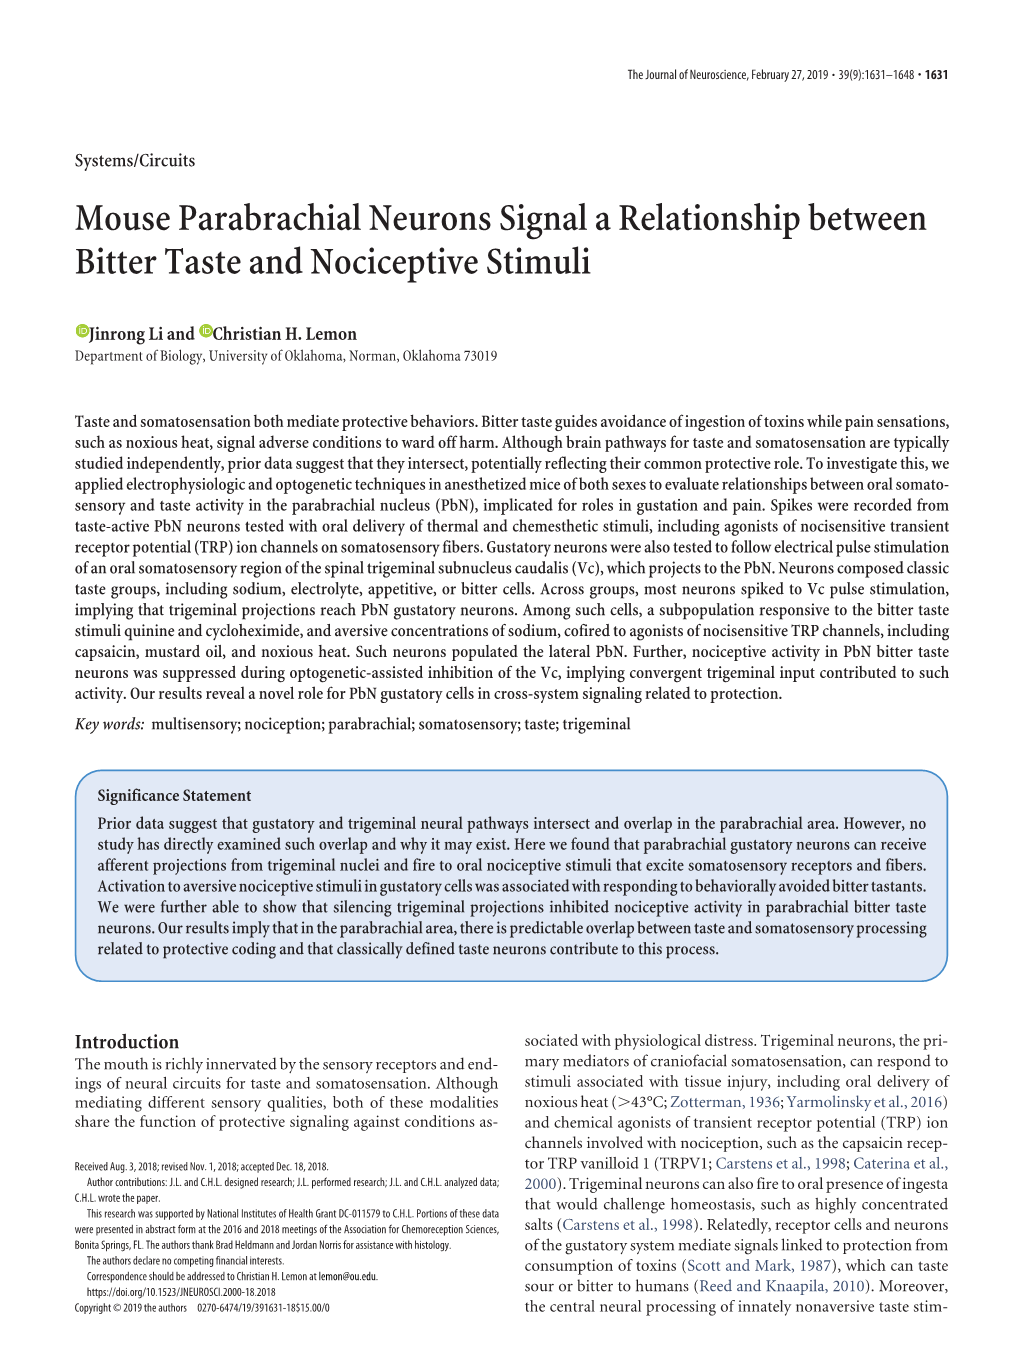 Mouse Parabrachial Neurons Signal a Relationship Between Bitter Taste and Nociceptive Stimuli